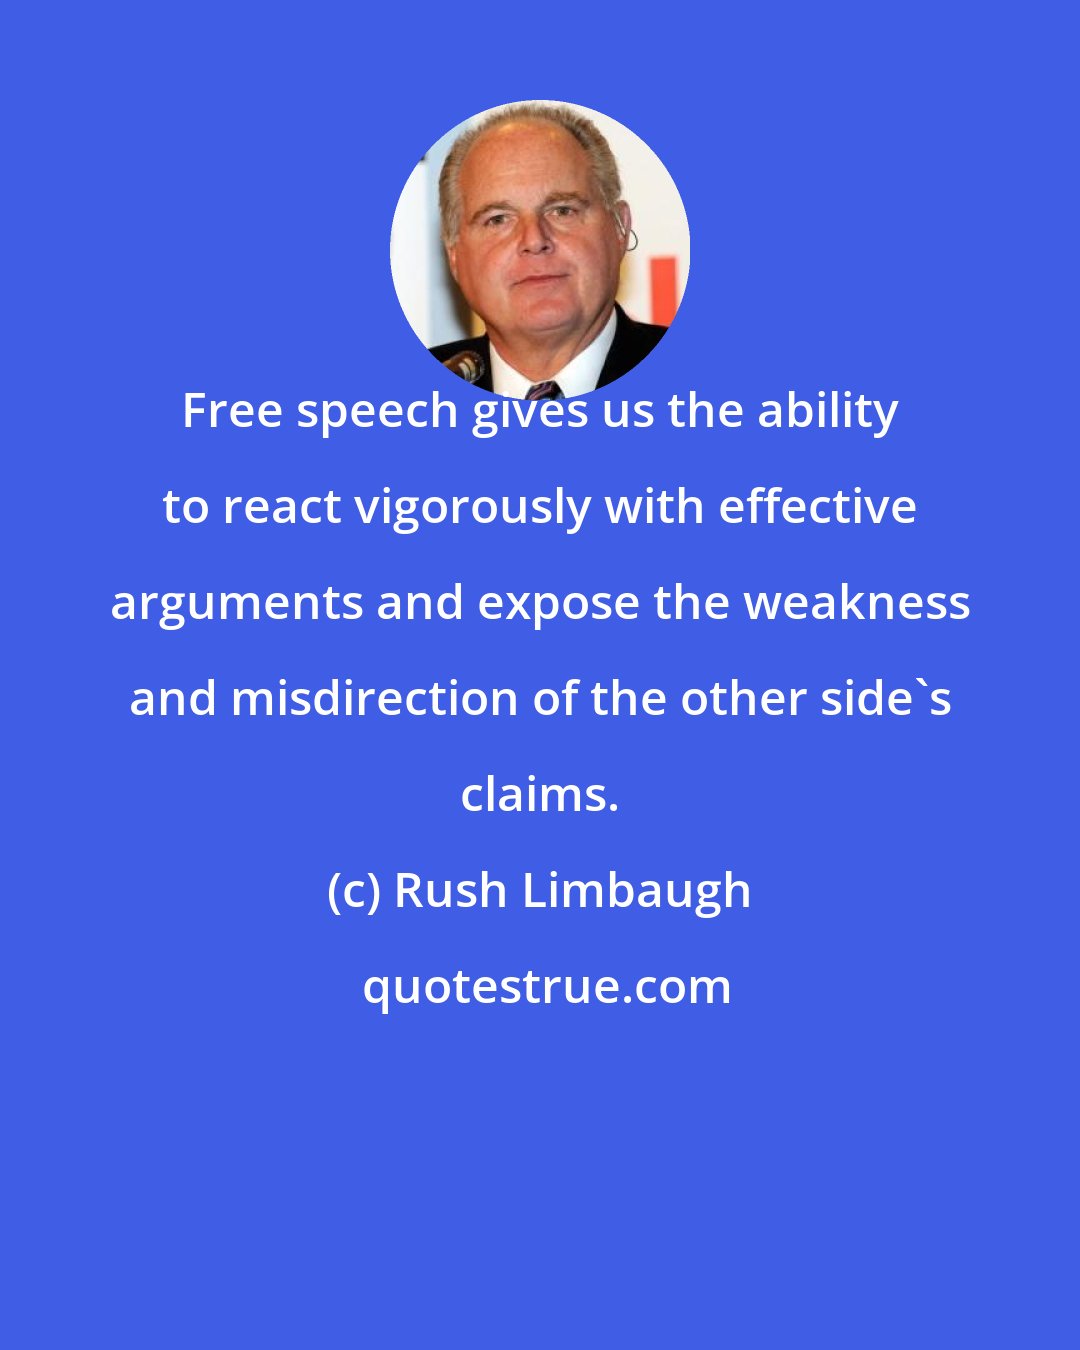 Rush Limbaugh: Free speech gives us the ability to react vigorously with effective arguments and expose the weakness and misdirection of the other side's claims.